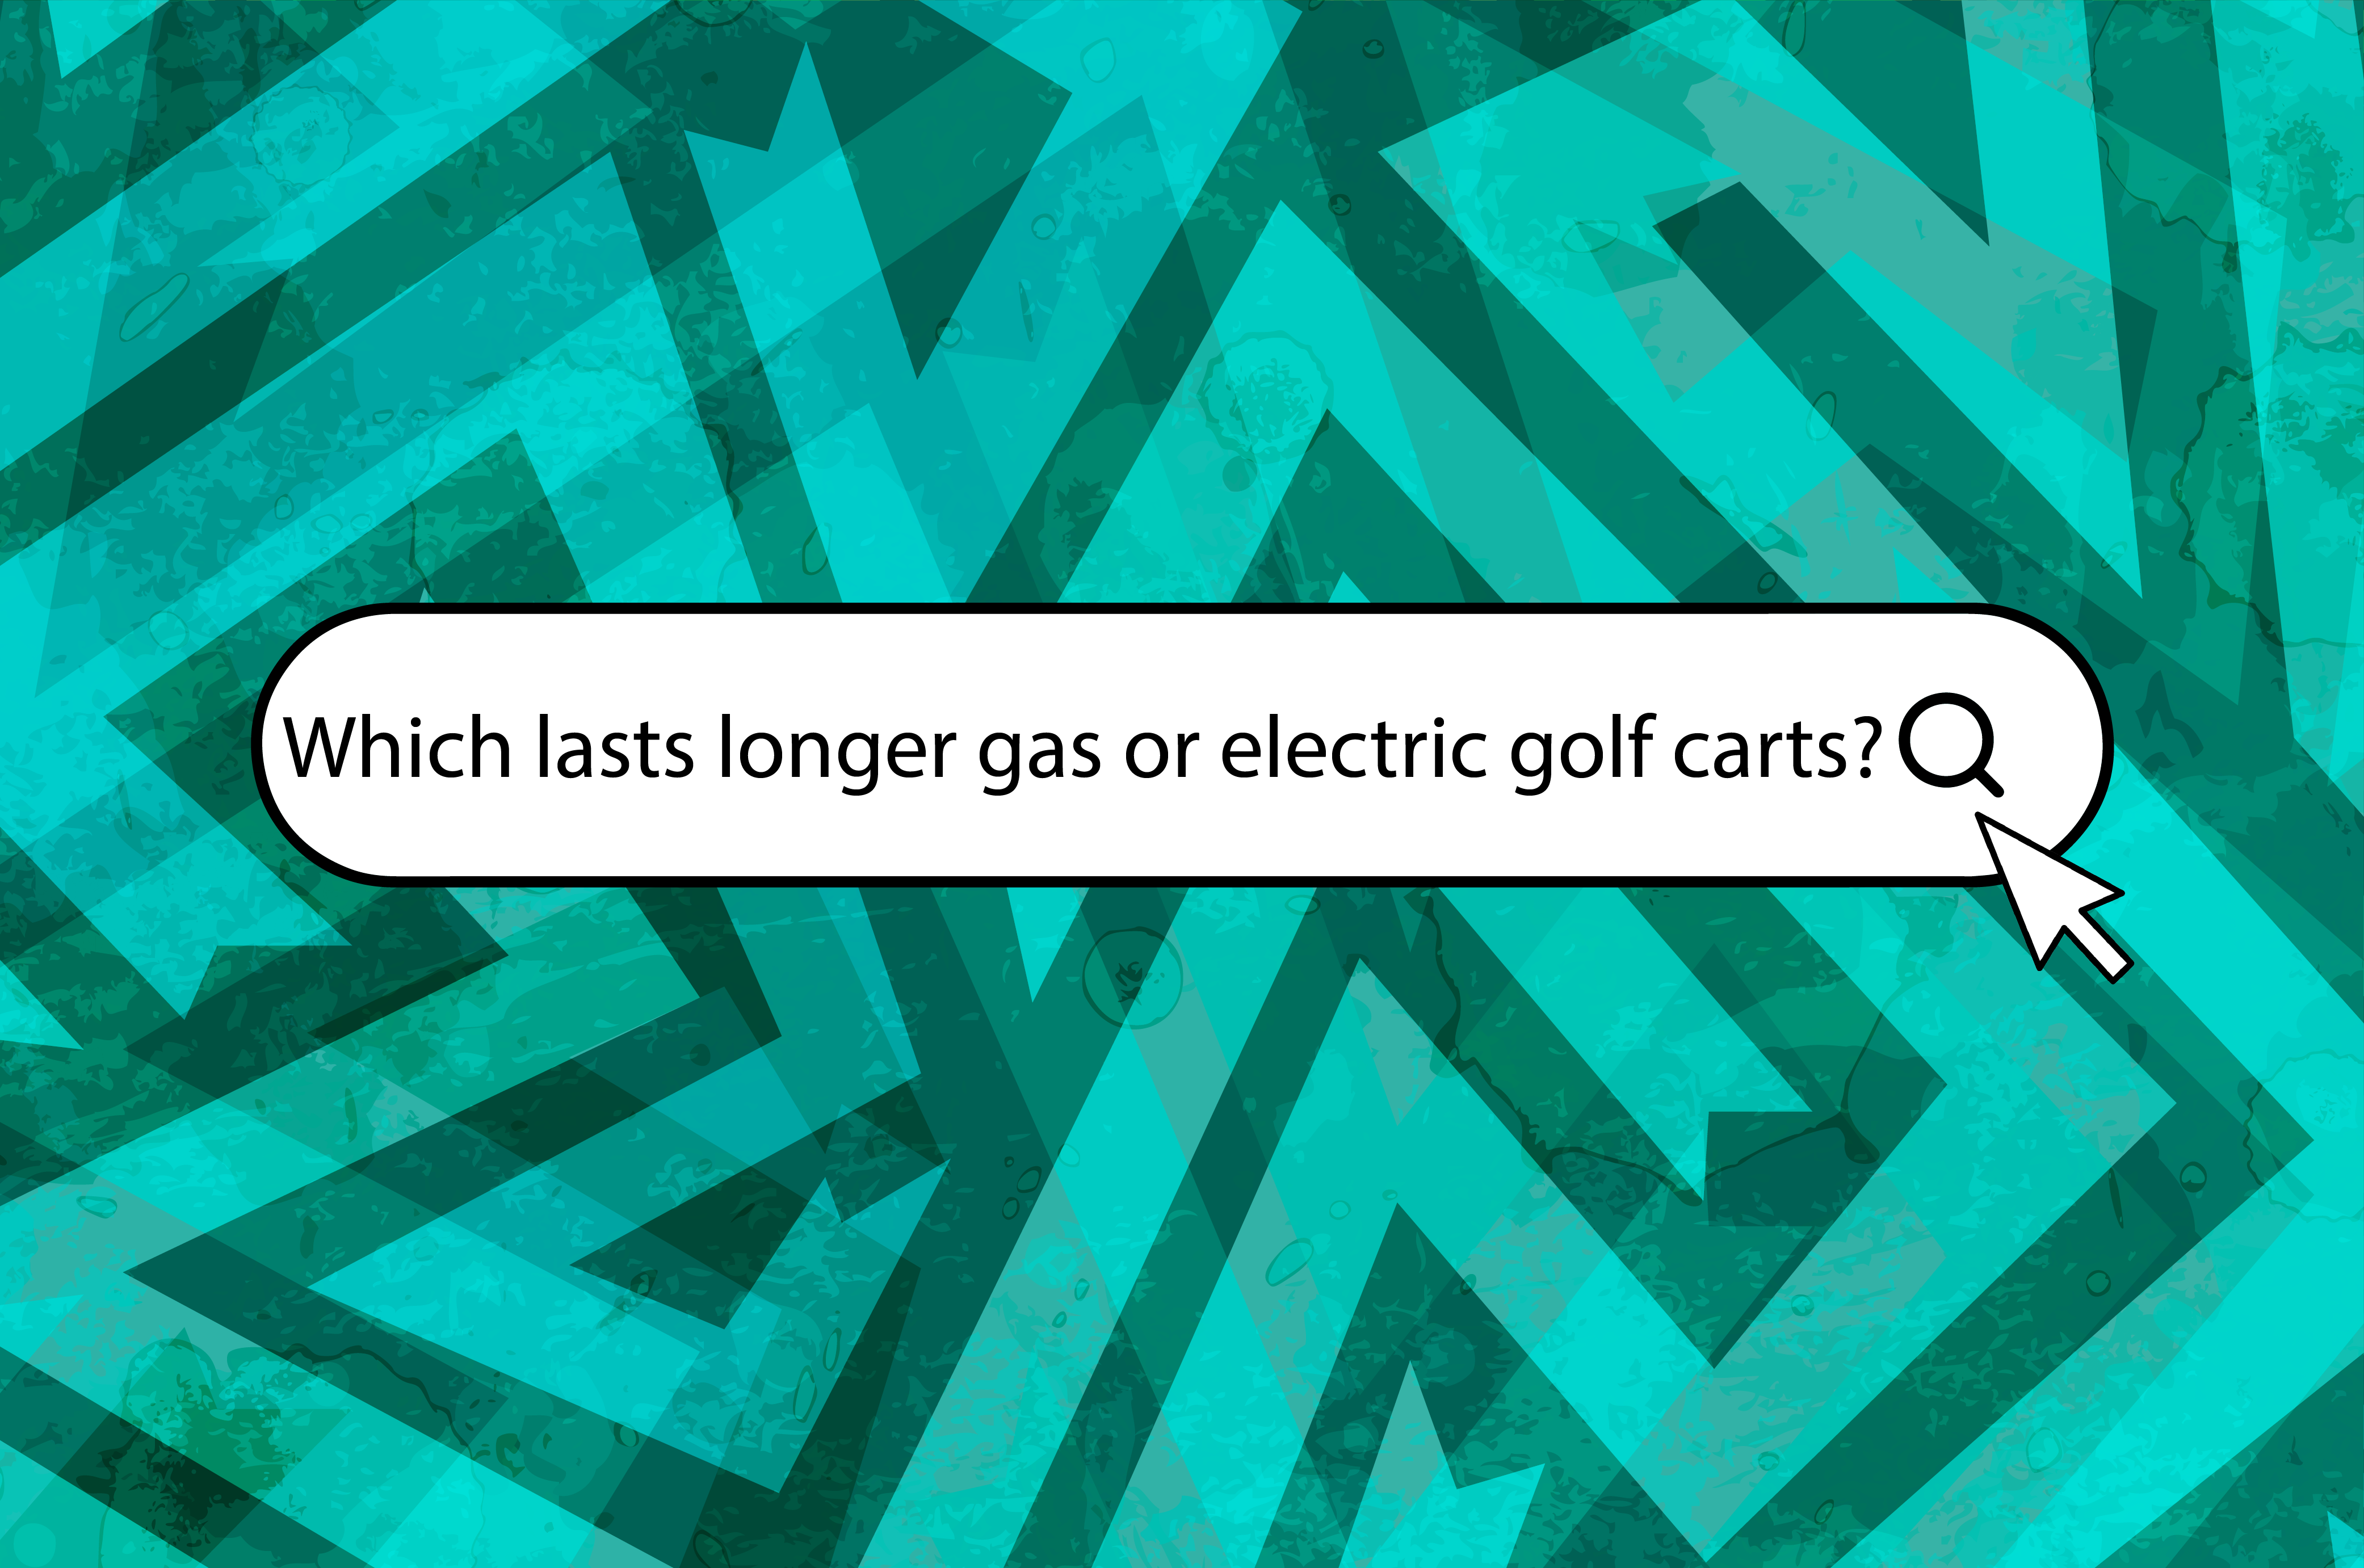 Which lasts longer gas or electric golf cart?